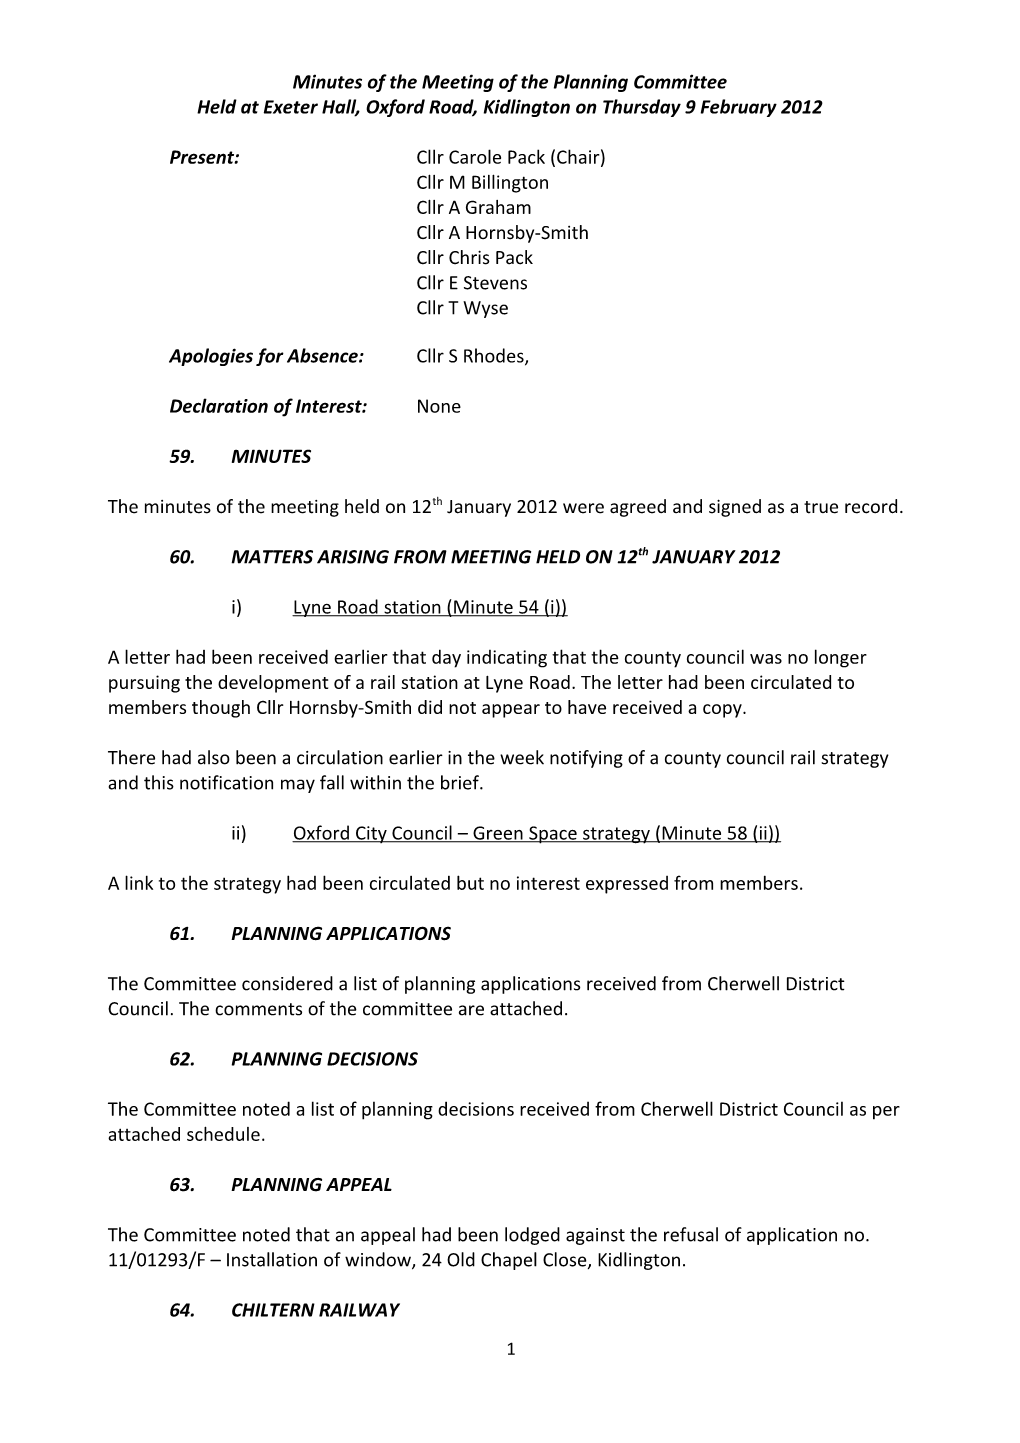 Minutes of the Meeting of the Planning Committee s1